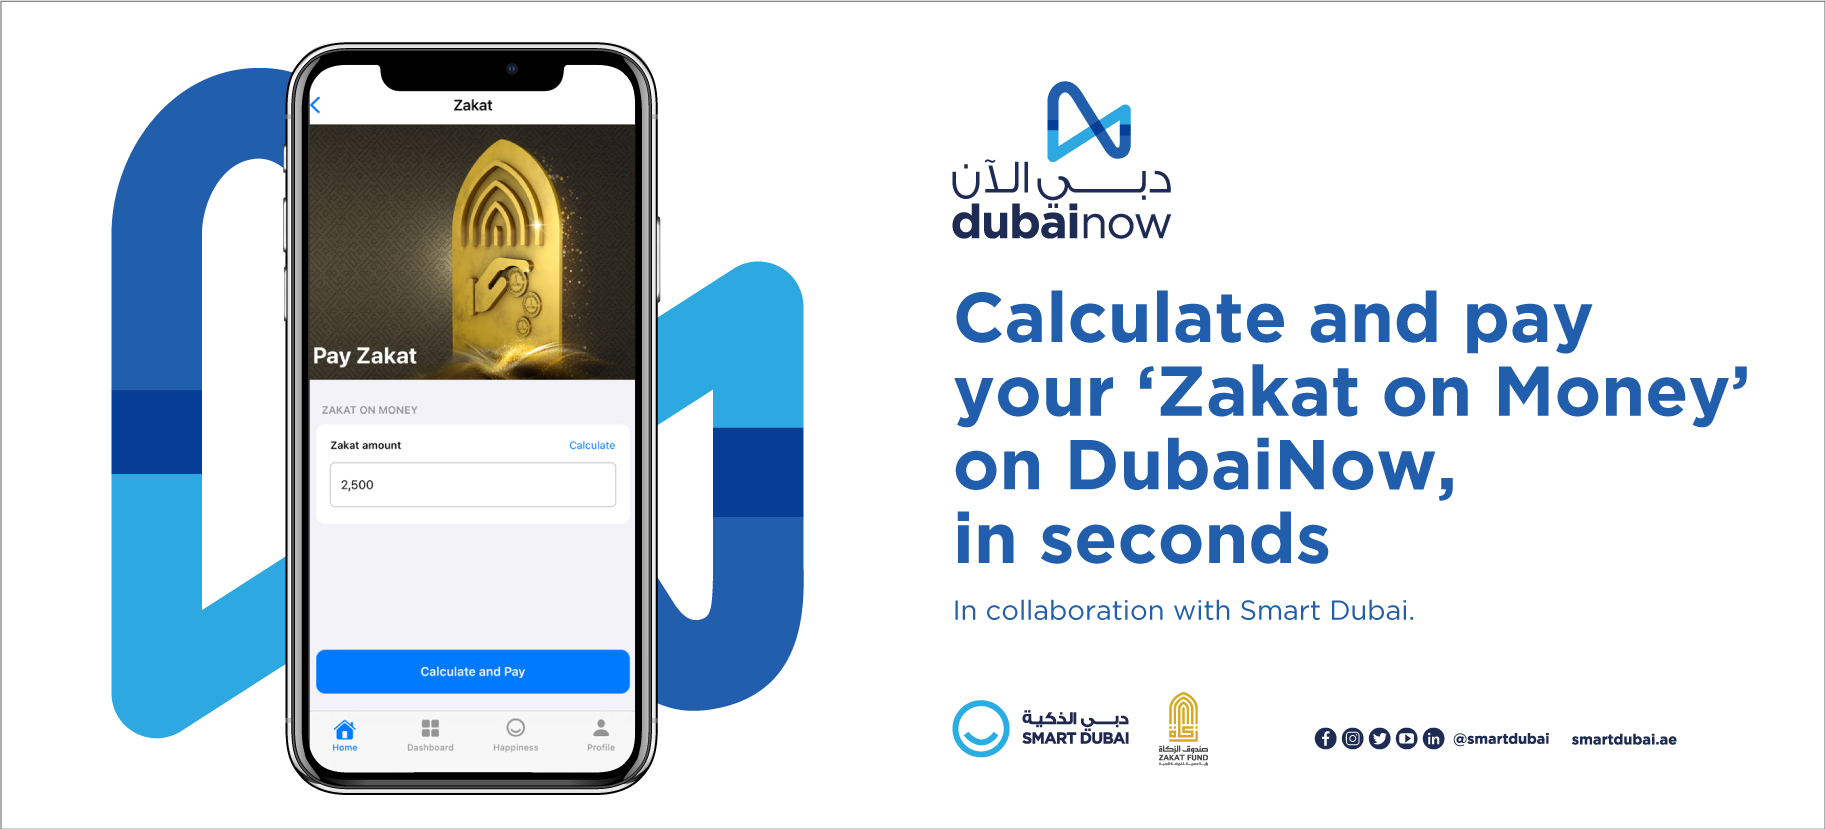 Image for Smart Dubai Launches New ‘Zakat’ Service On DubaiNow App In Collaboration With UAE Zakat Fund